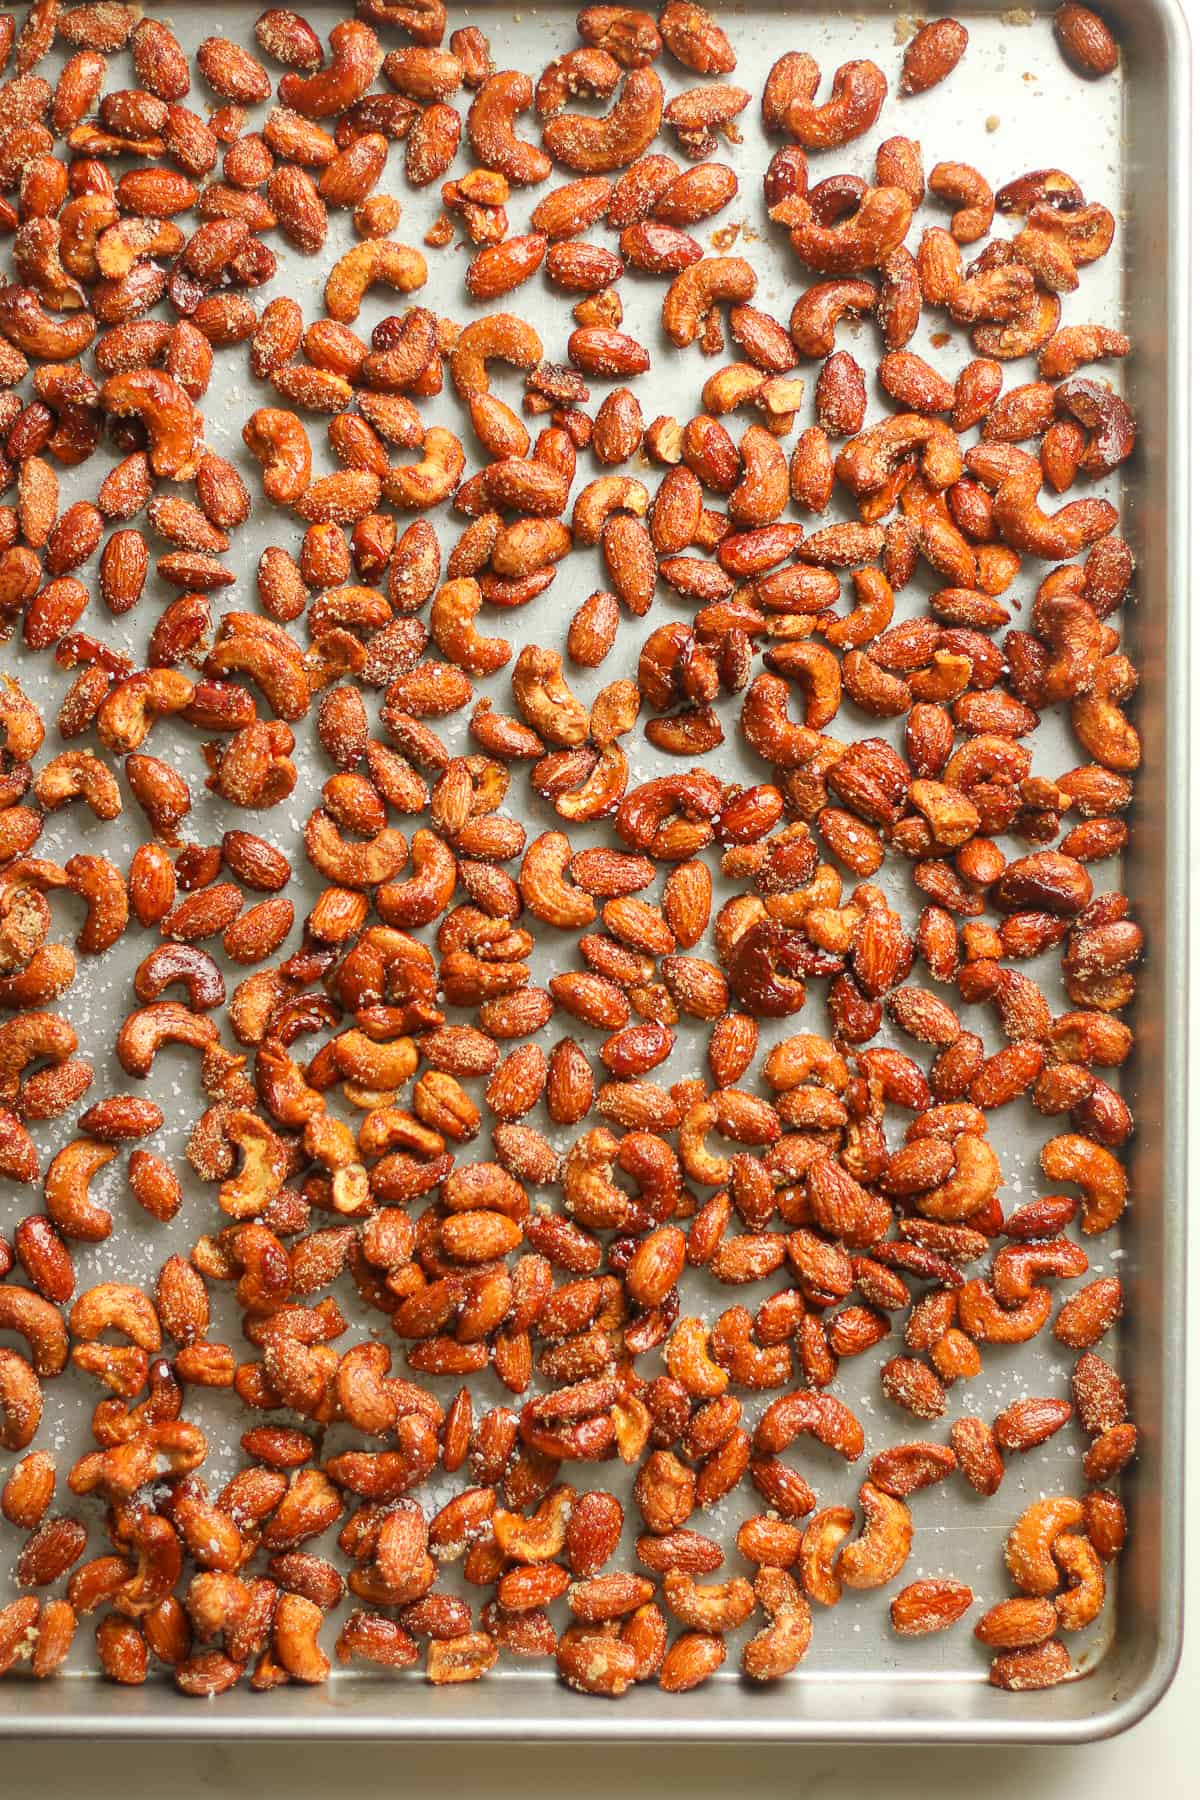 A sheet pan of the roasted nuts.